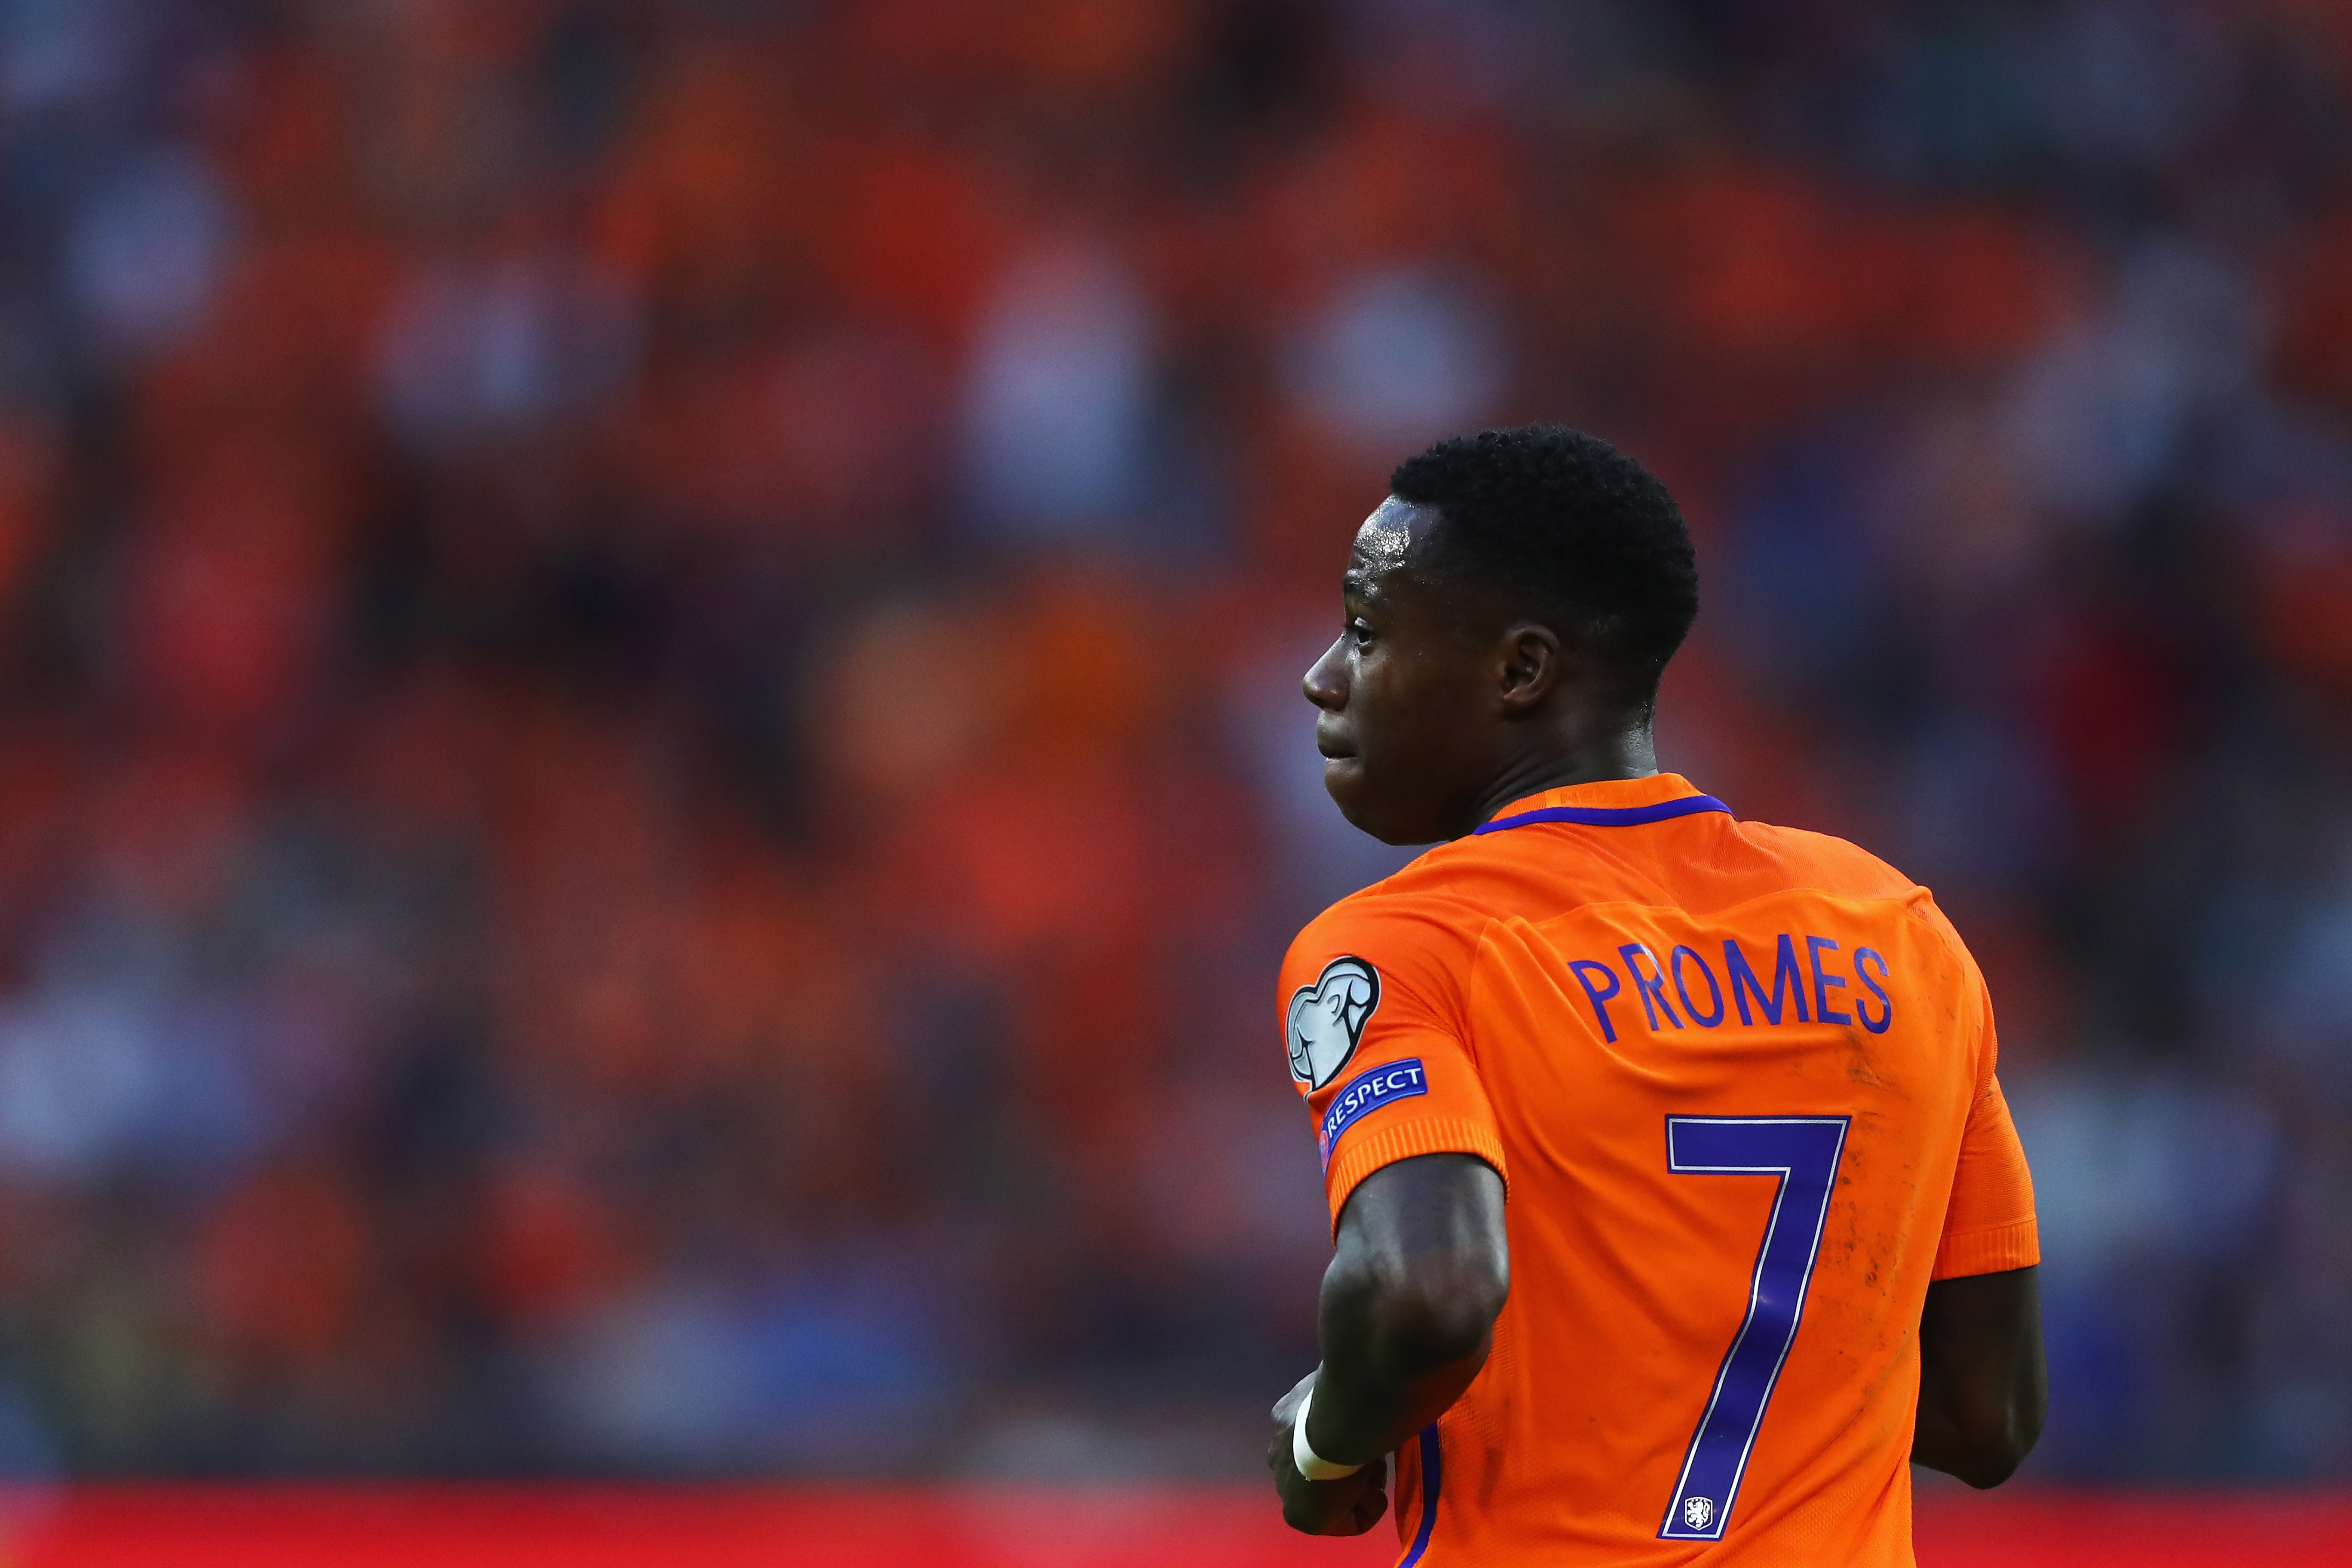 AMSTERDAM, NETHERLANDS - SEPTEMBER 03:  Quincy Promes of the Netherlands looks on during the FIFA 2018 World Cup Qualifier between the Netherlands and Bulgaria held at The Amsterdam ArenA on September 3, 2017 in Amsterdam, Netherlands.  (Photo by Dean Mouhtaropoulos/Getty Images)